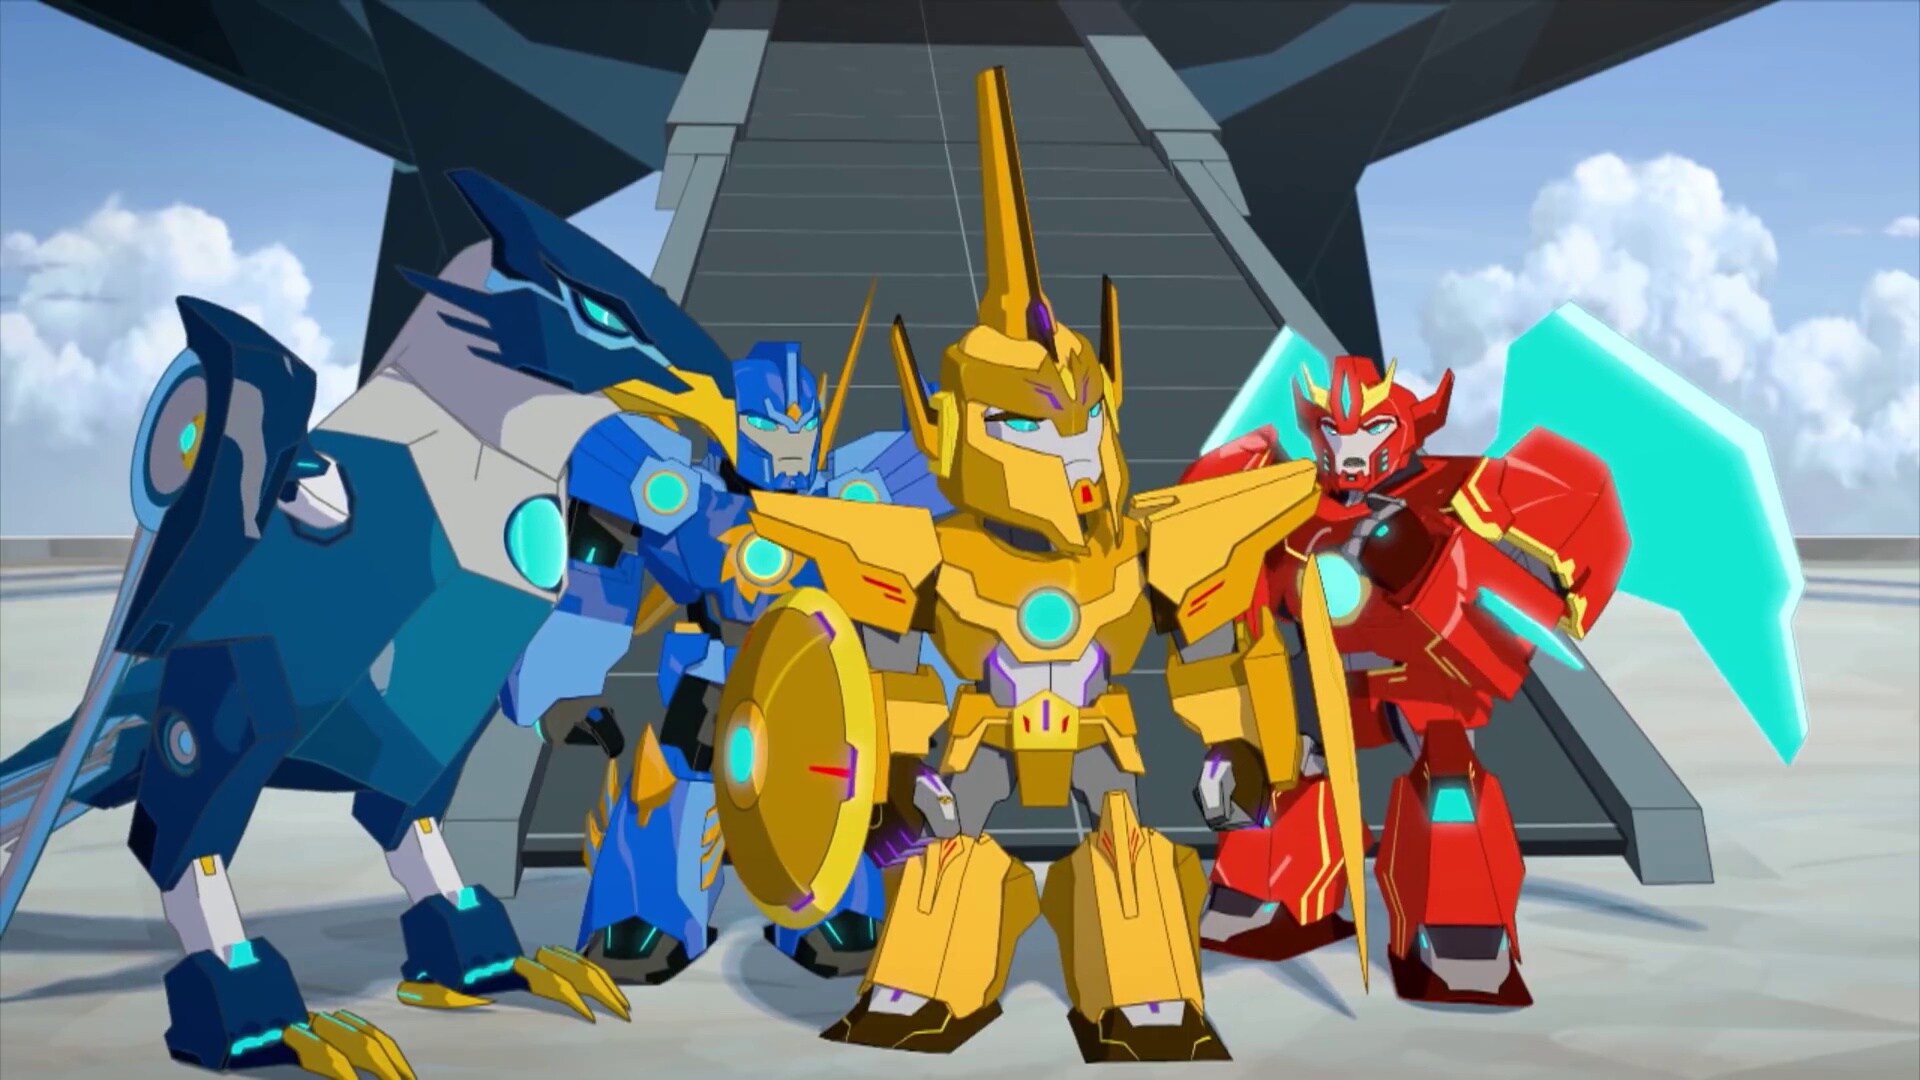 Transformers Cyberverse | Watch free videos and play games | Cartoon Network